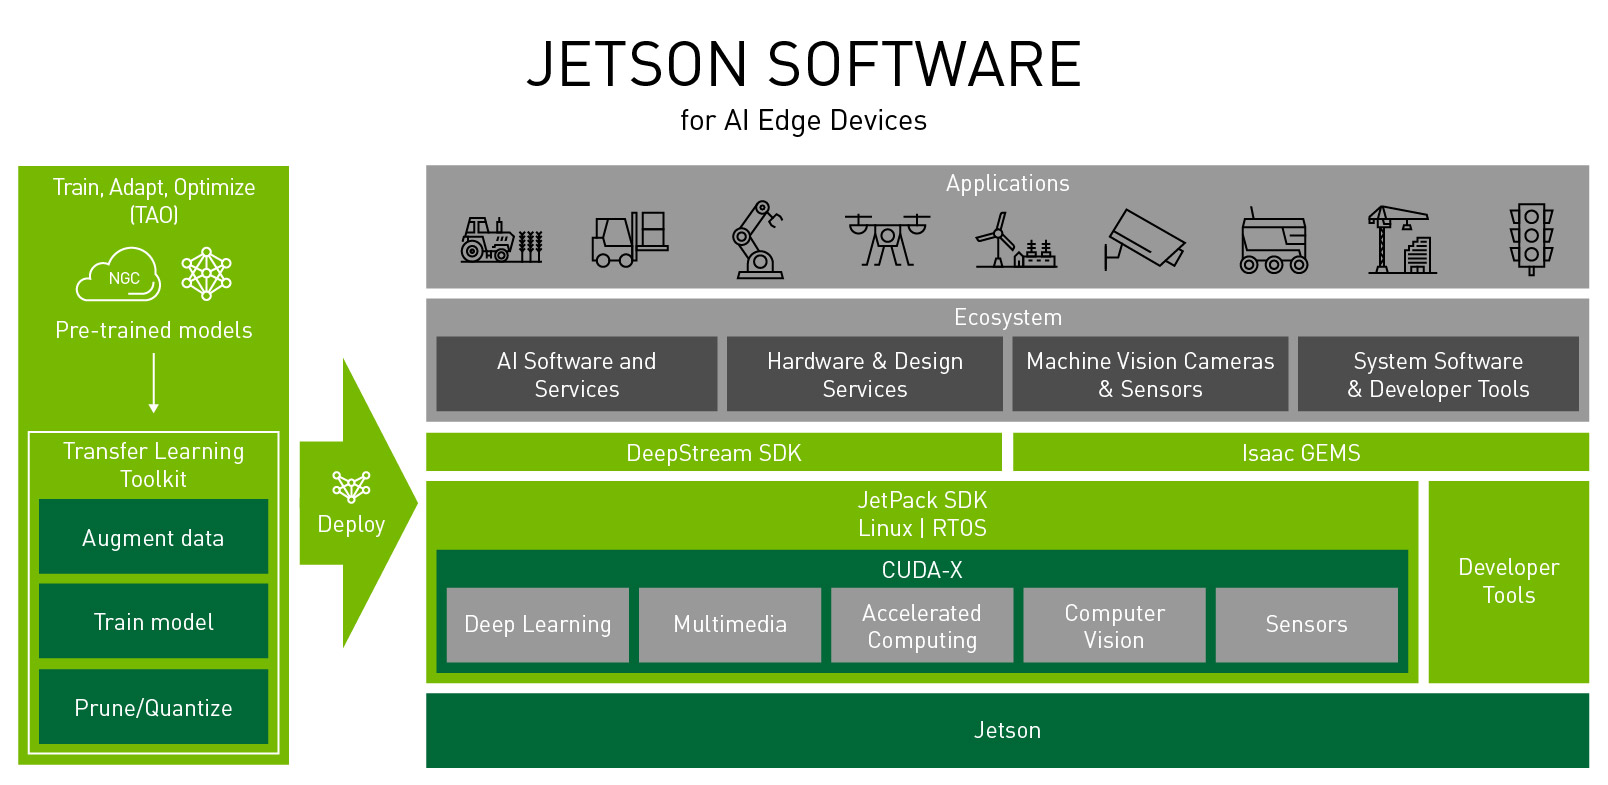 Jetson Software Architecture Image